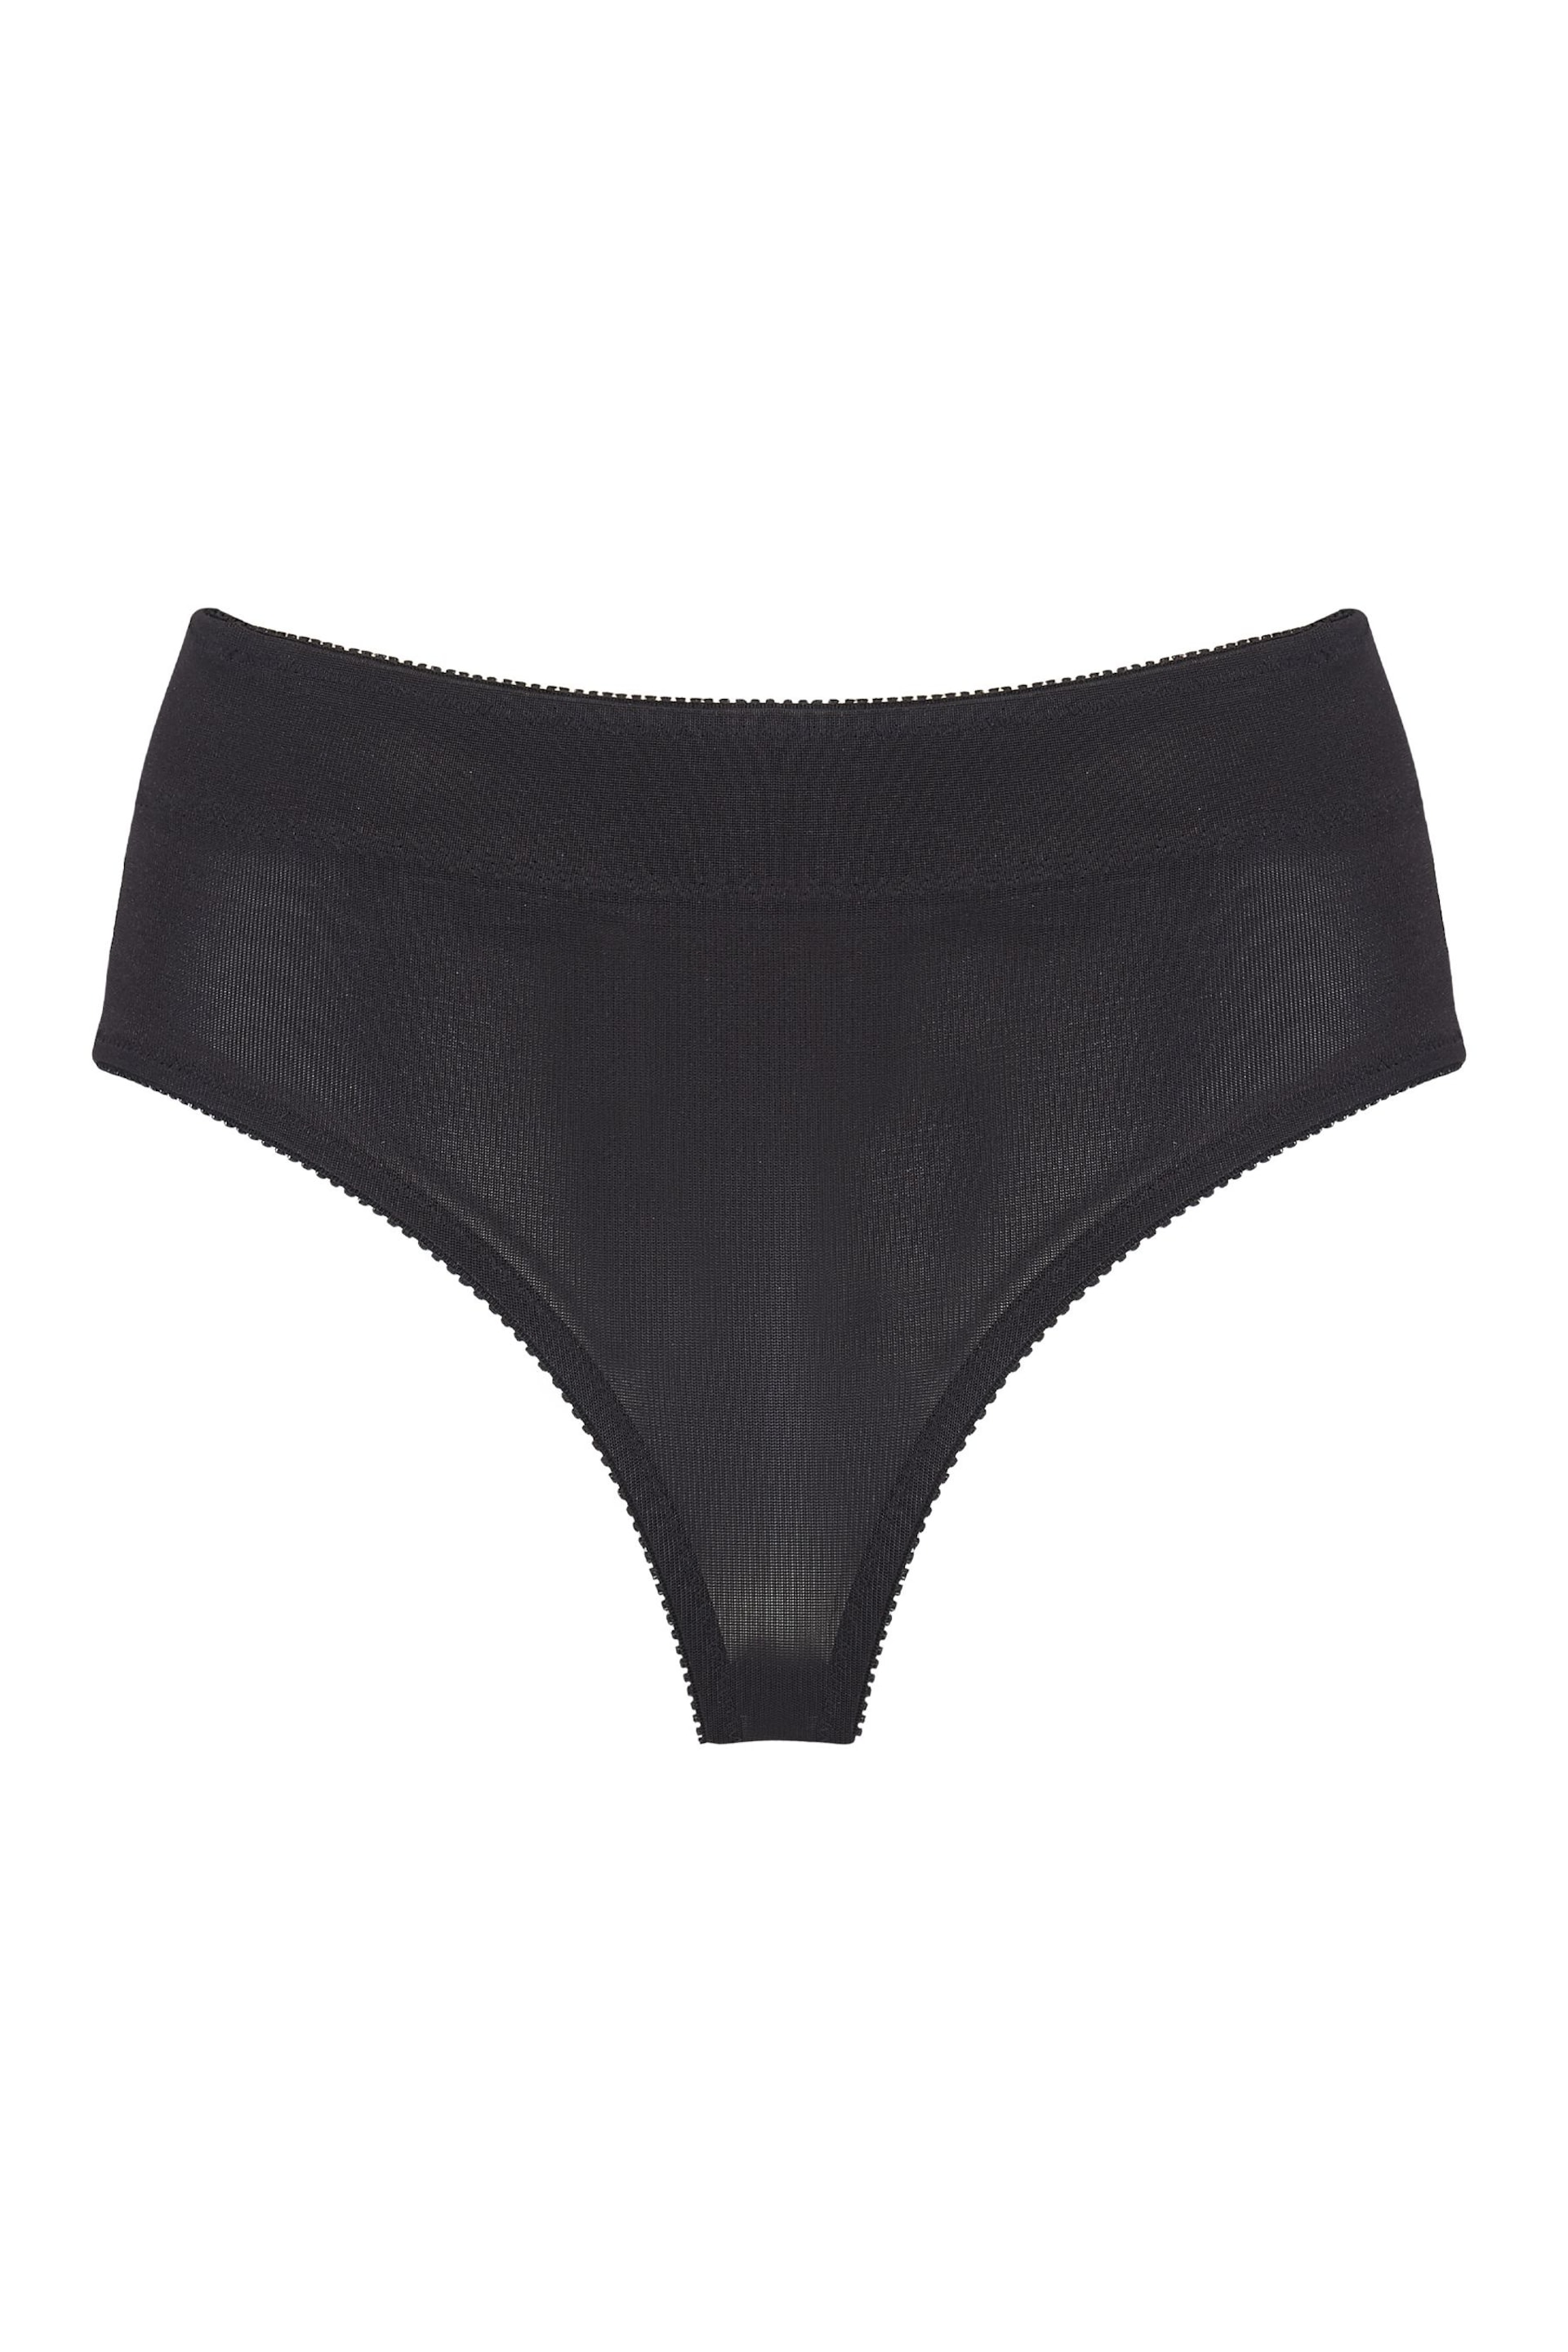 Pour Moi Black Hourglass Shapewear Firm Tummy Control Thong - Image 5 of 5